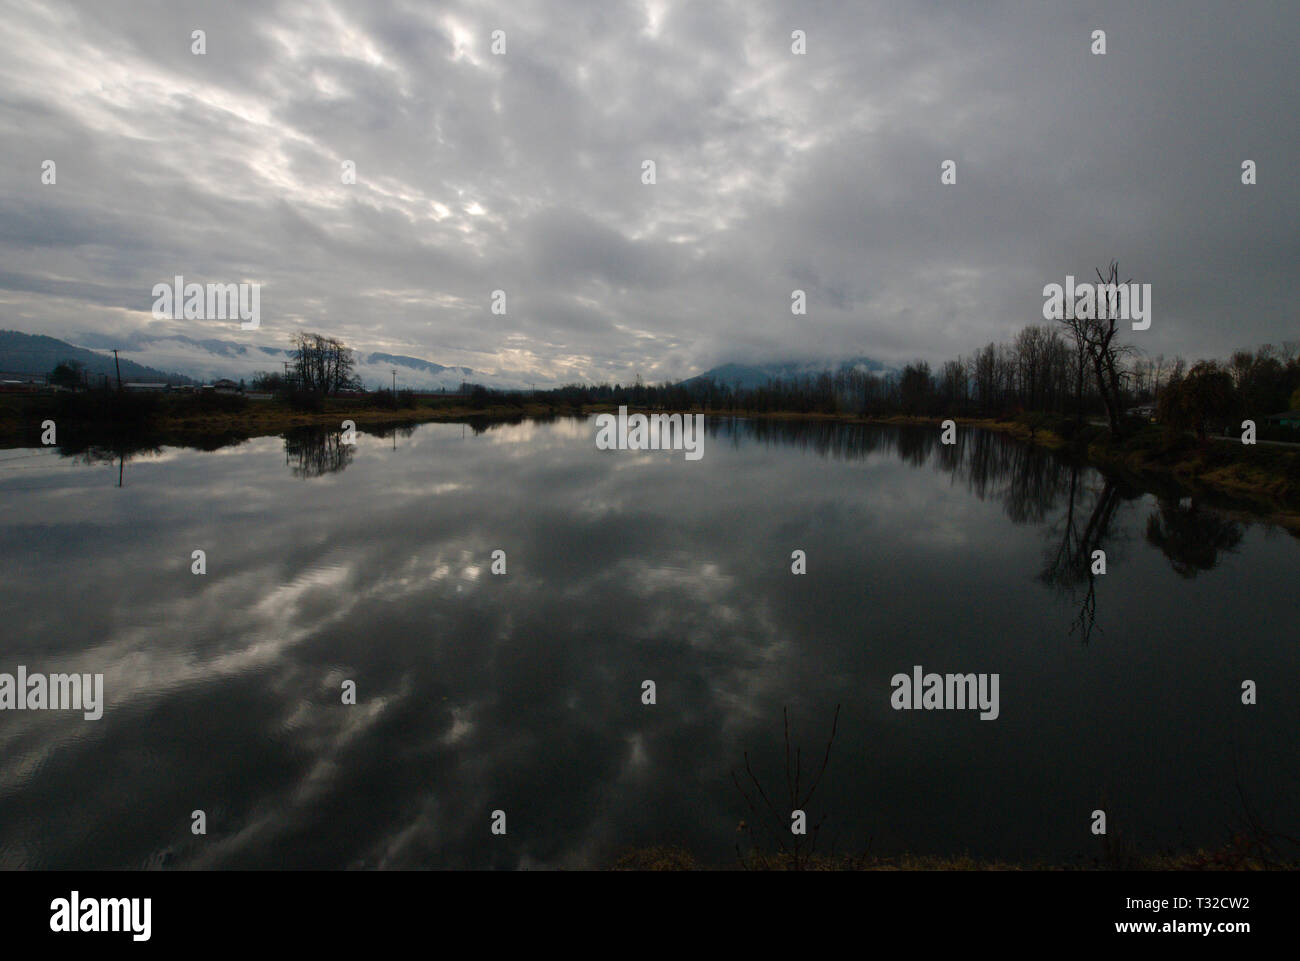 A placid backwater of the Vedder River reflects a turbulent gray overcast sky. Stock Photo